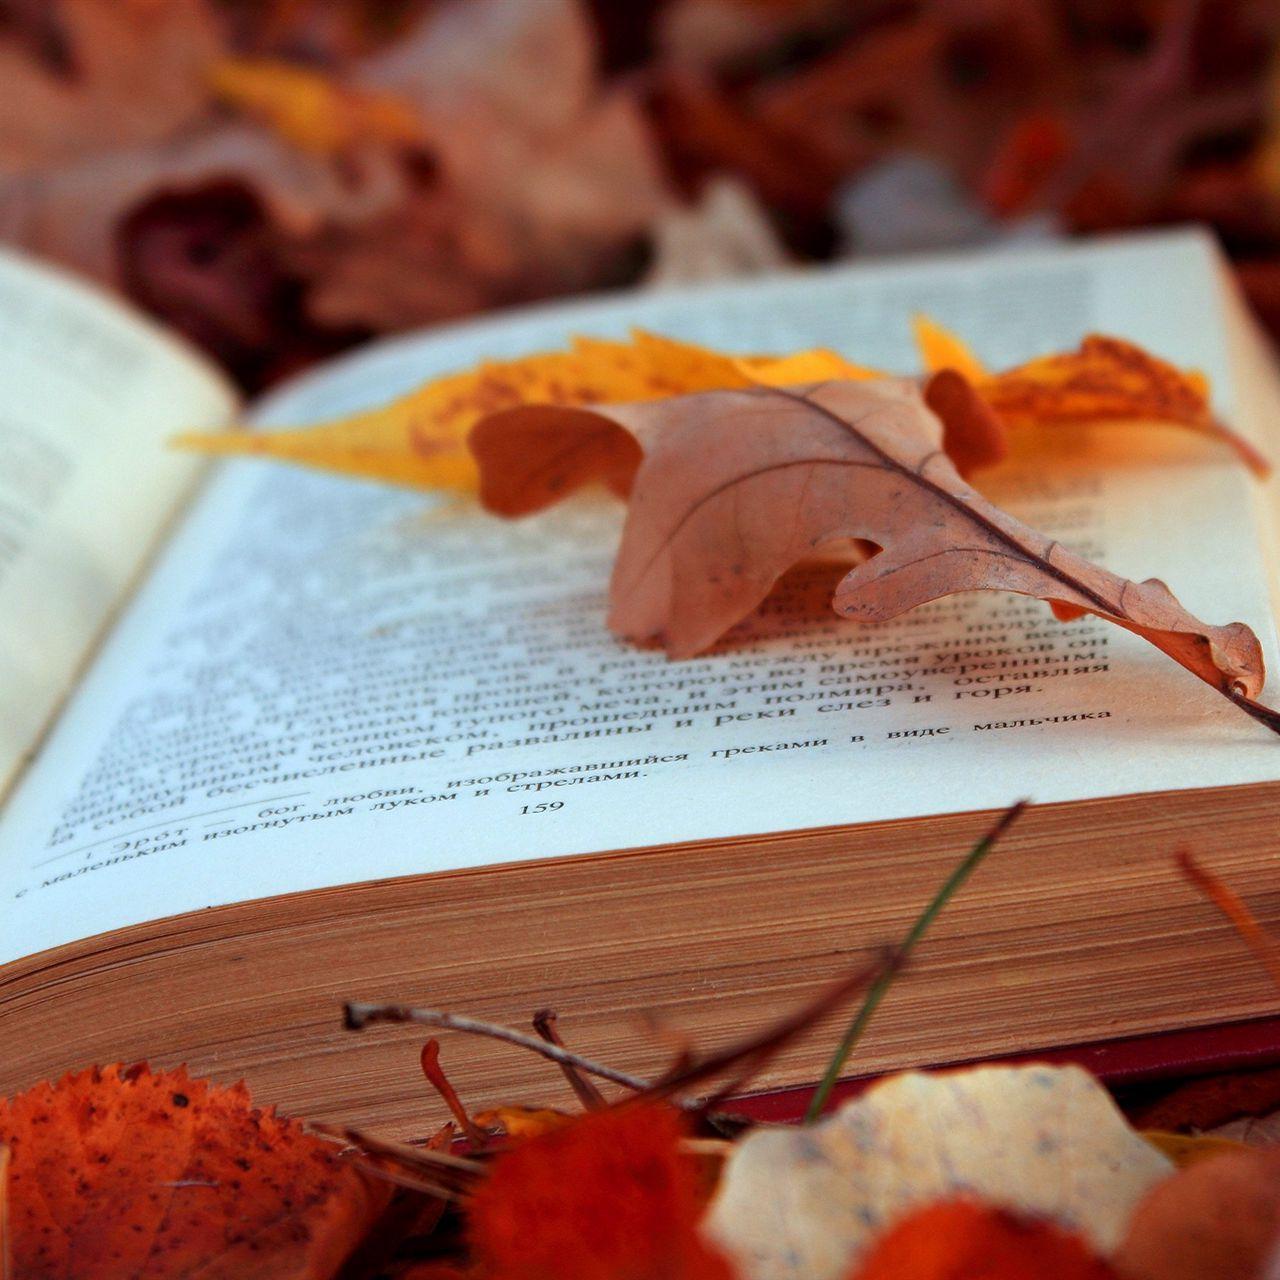 Autumn Books Wallpapers - Top Free Autumn Books Backgrounds ...